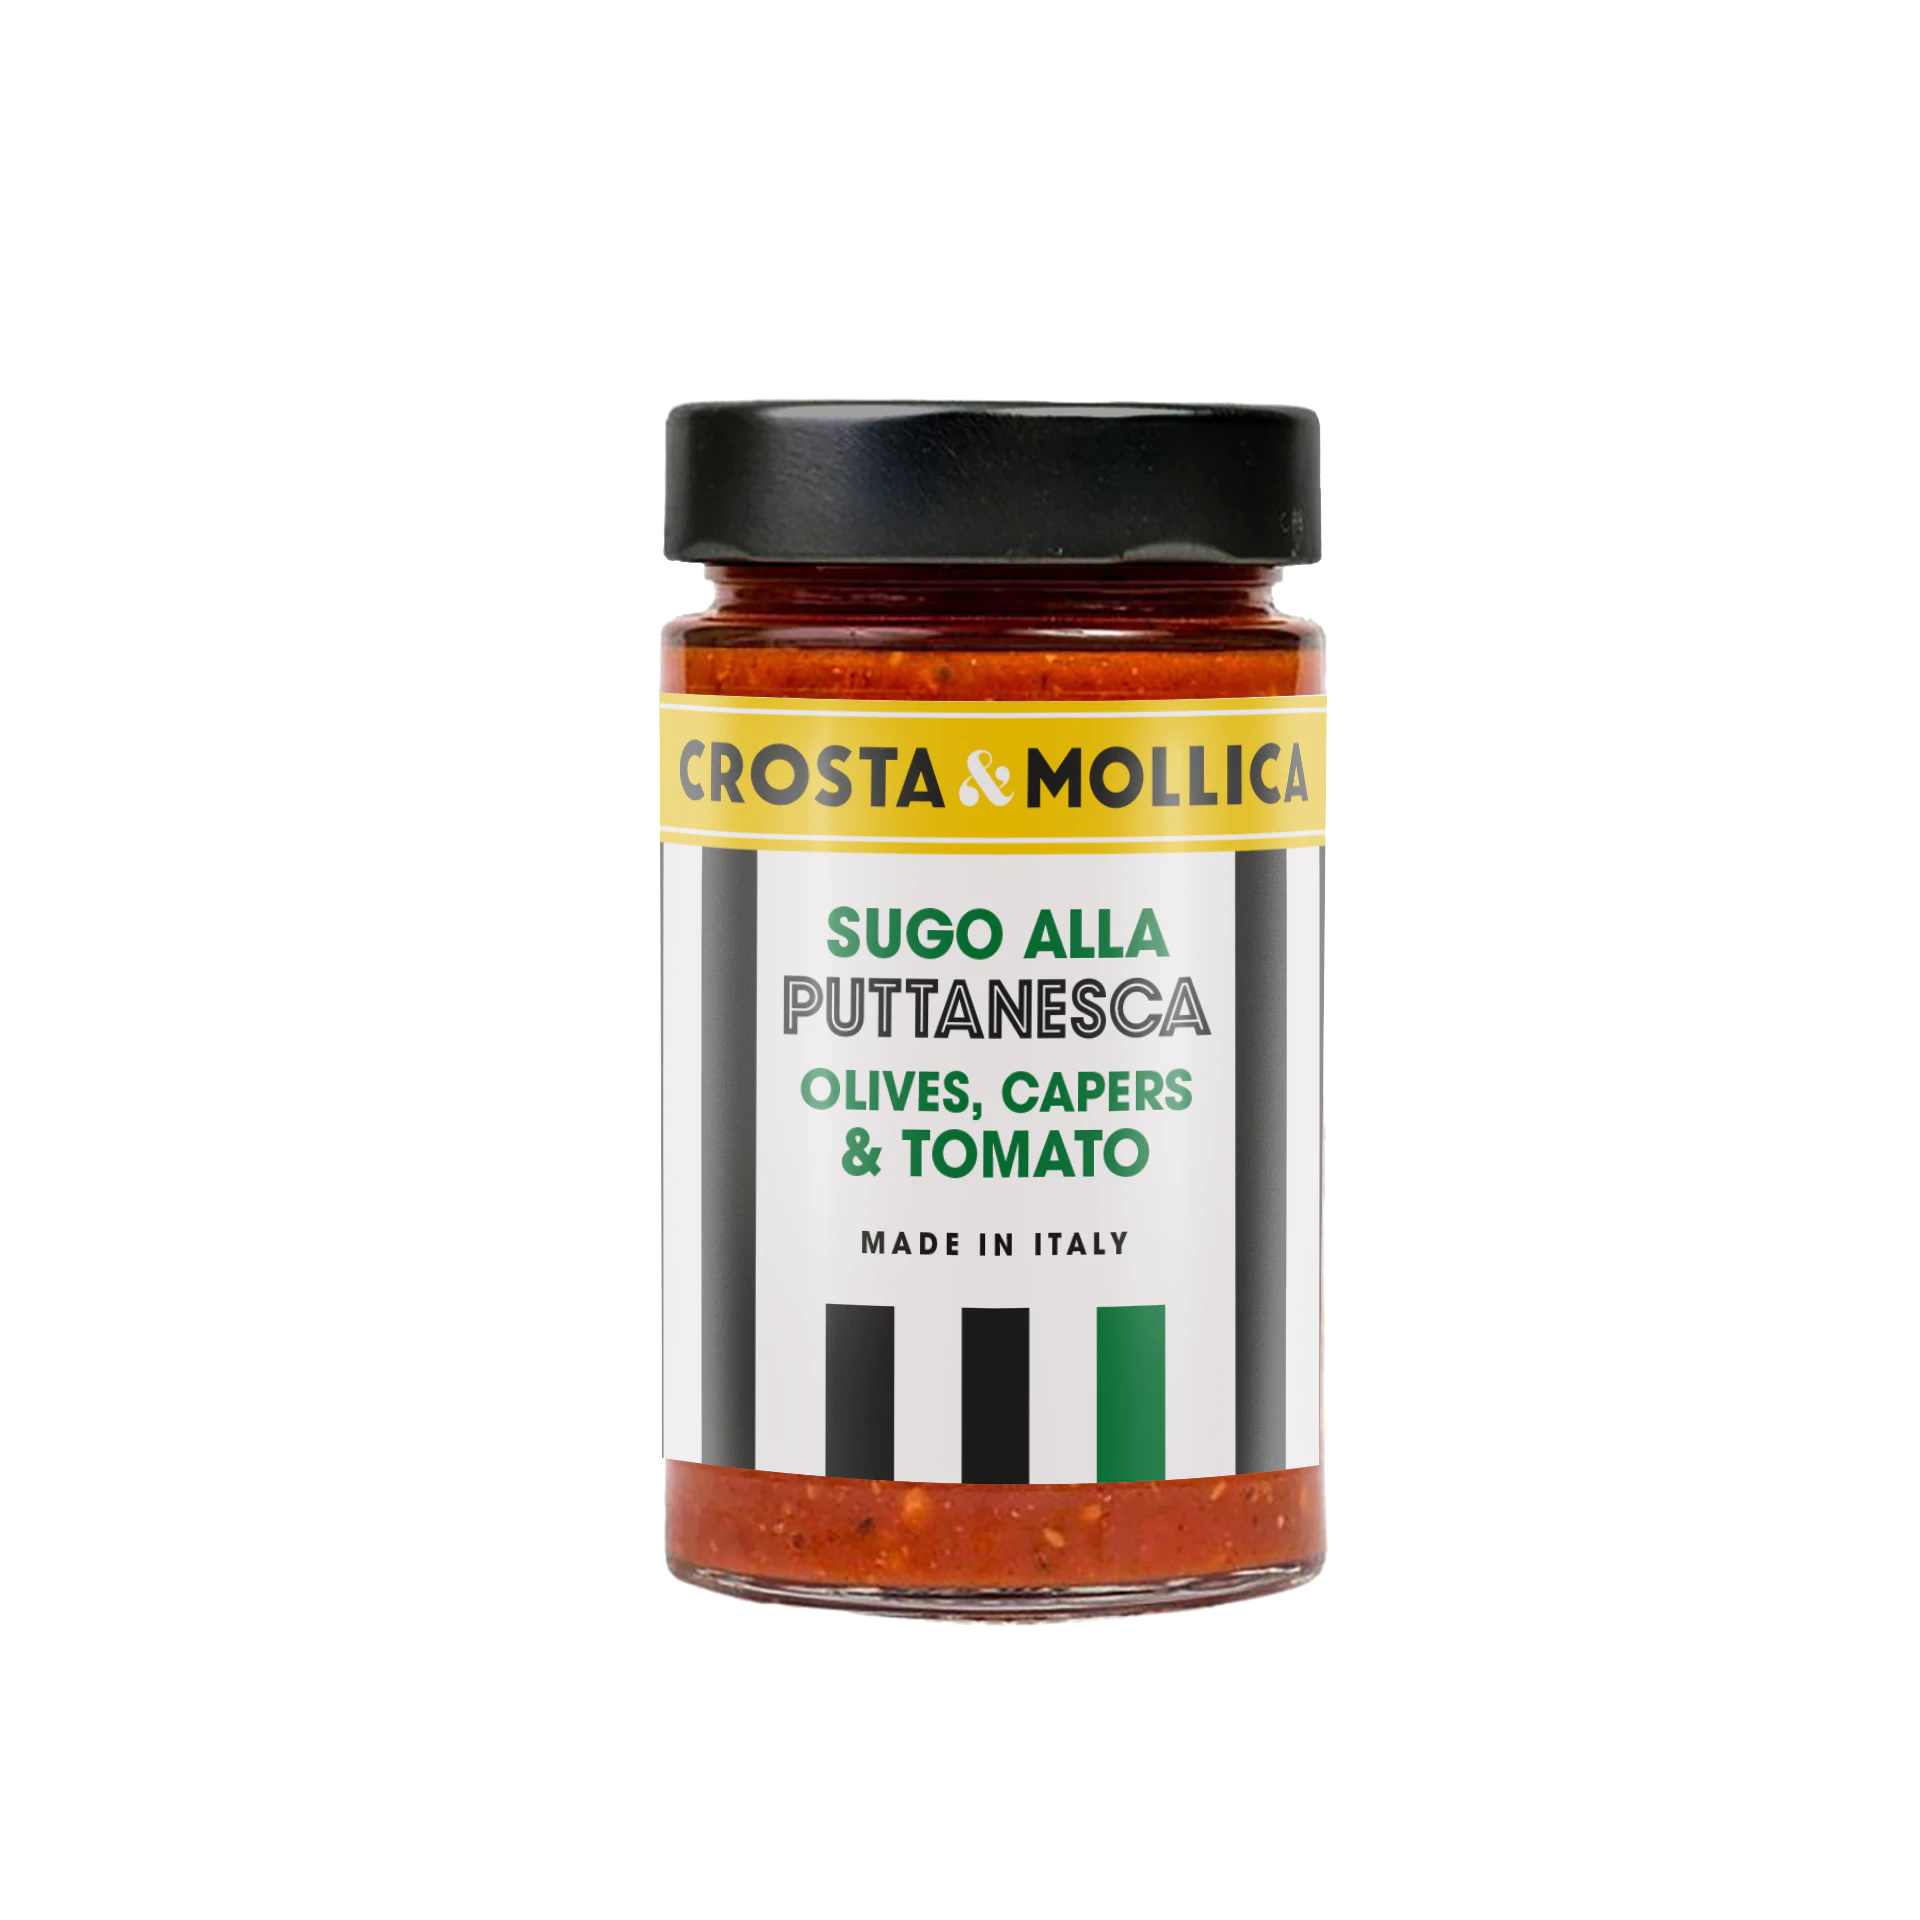 A jar of Sugo alla Puttanesca, the label has white and black vertical stripes running down it and a black lid.